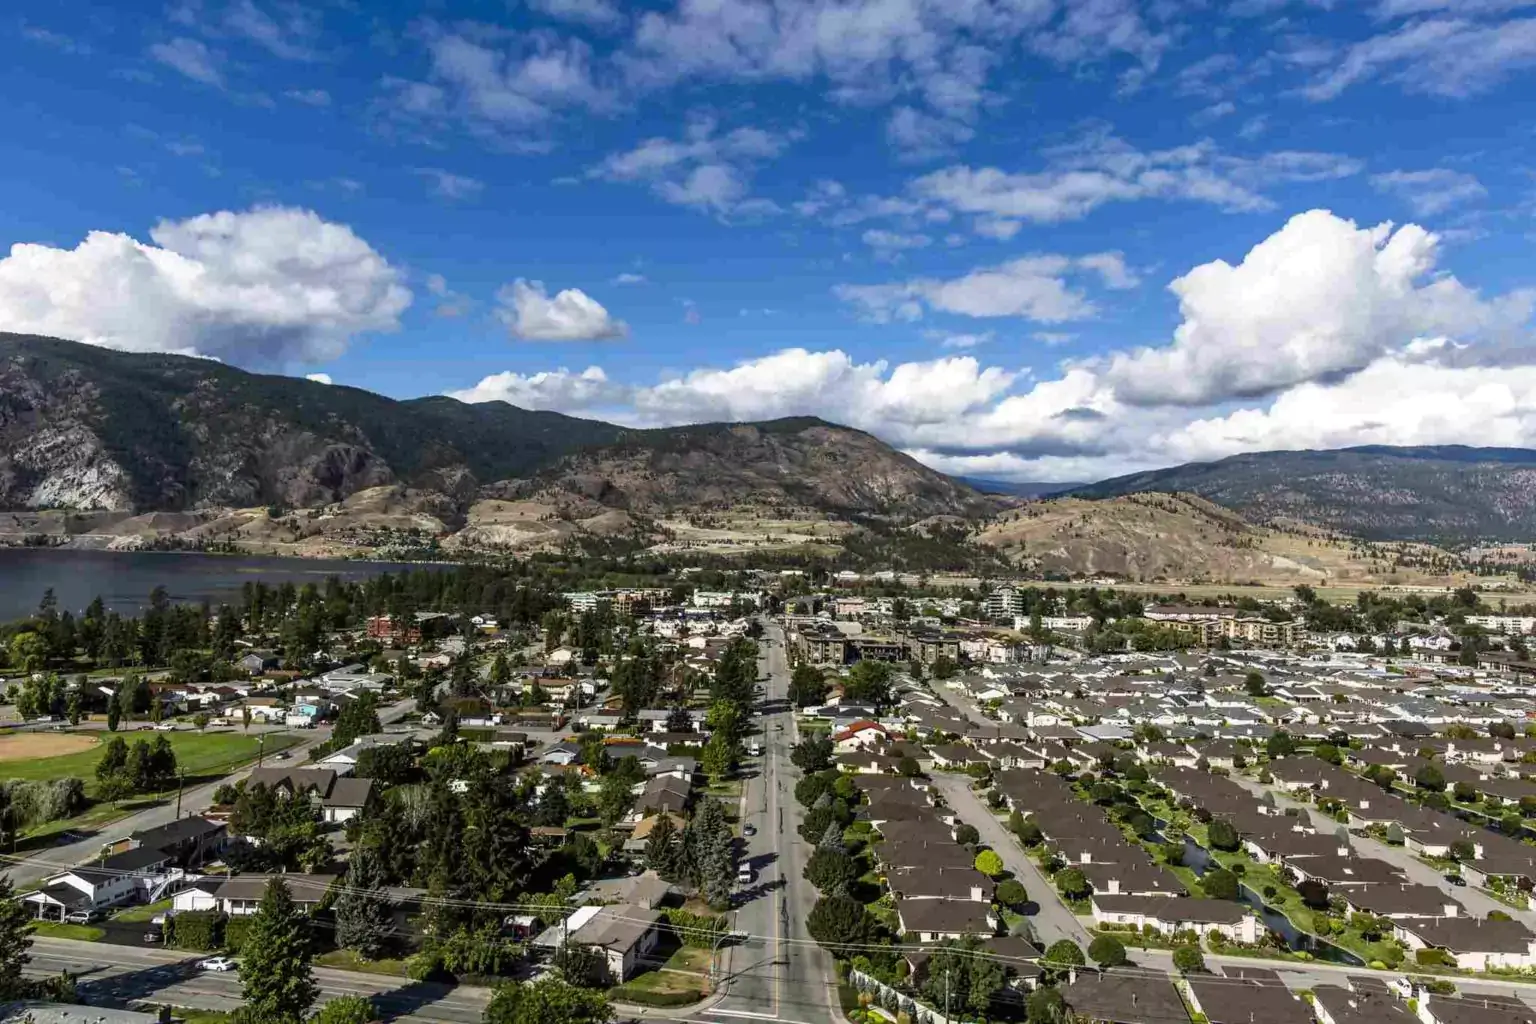 Aerial view of a small town with mountains in the background.